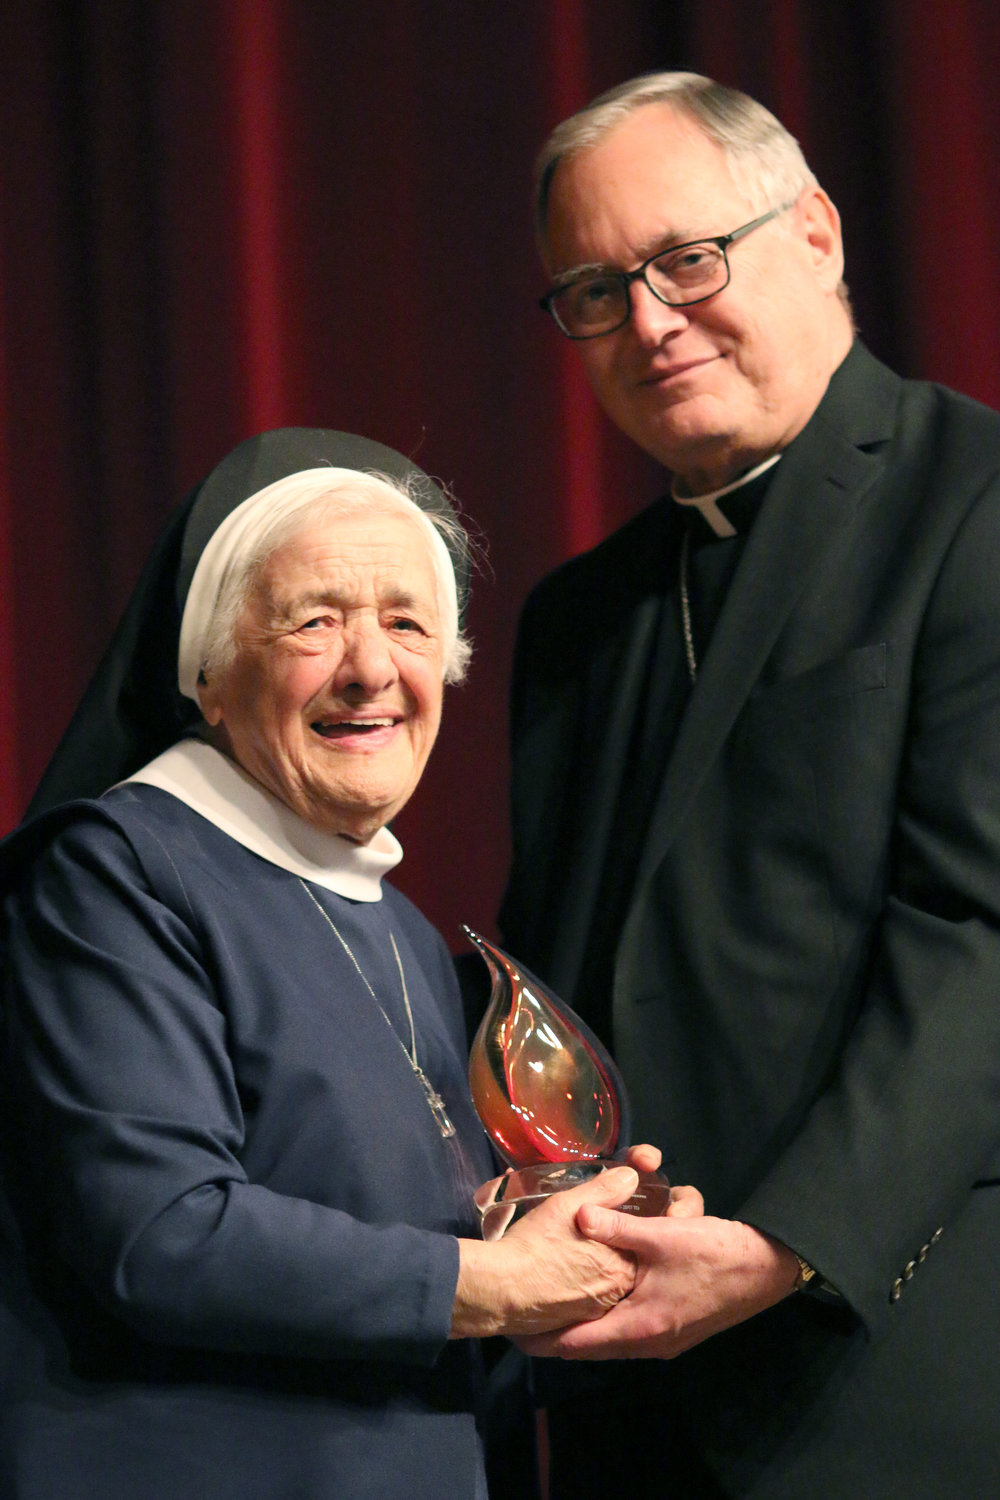 Bishop Thomas J. Tobin presents Sister Mary Angelus with a Lumen Gentium Award. In 2017, the Diocese of Providence honored her with this special Lifetime Achievement Award in Catholic Education.